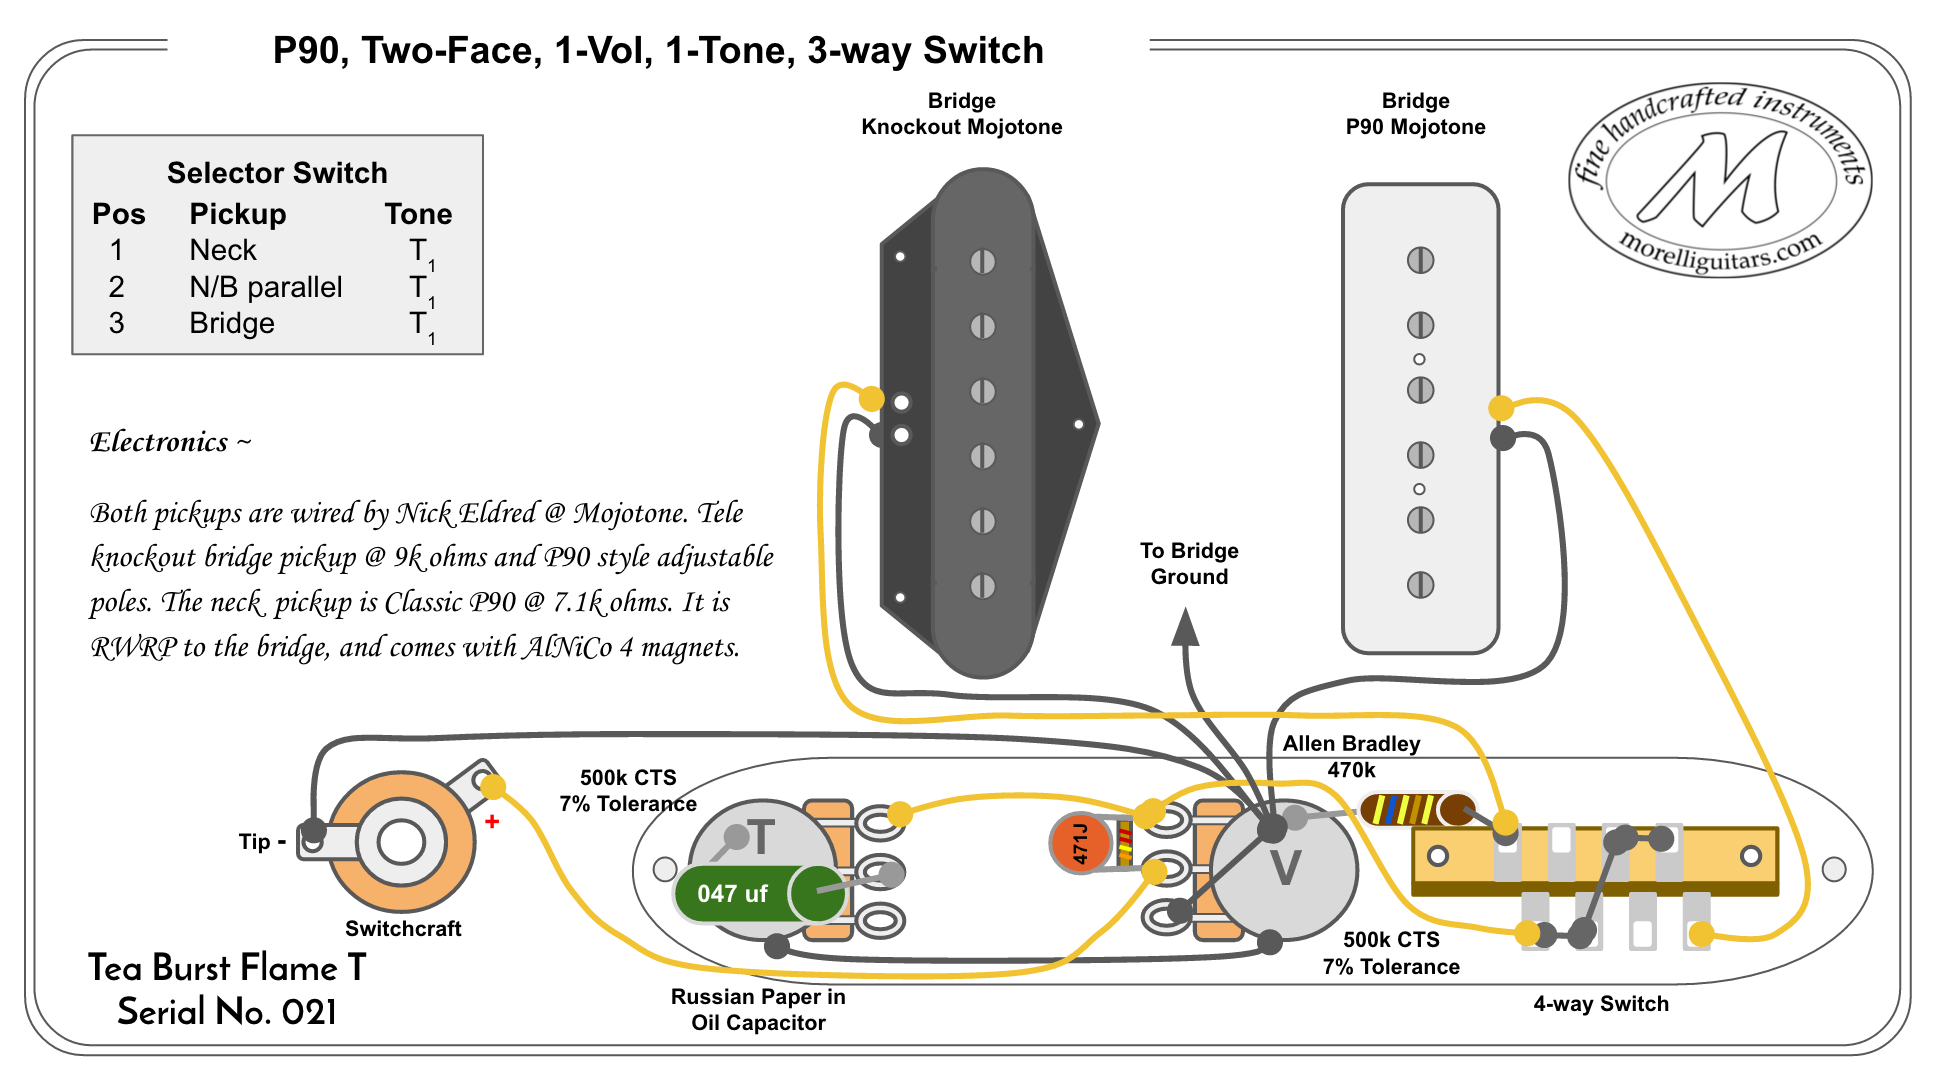 P90, Two-Face, 1-Vol, 1-Tone, 3-way Switch - FMM 021 ... guitar electronics wiring diagram 